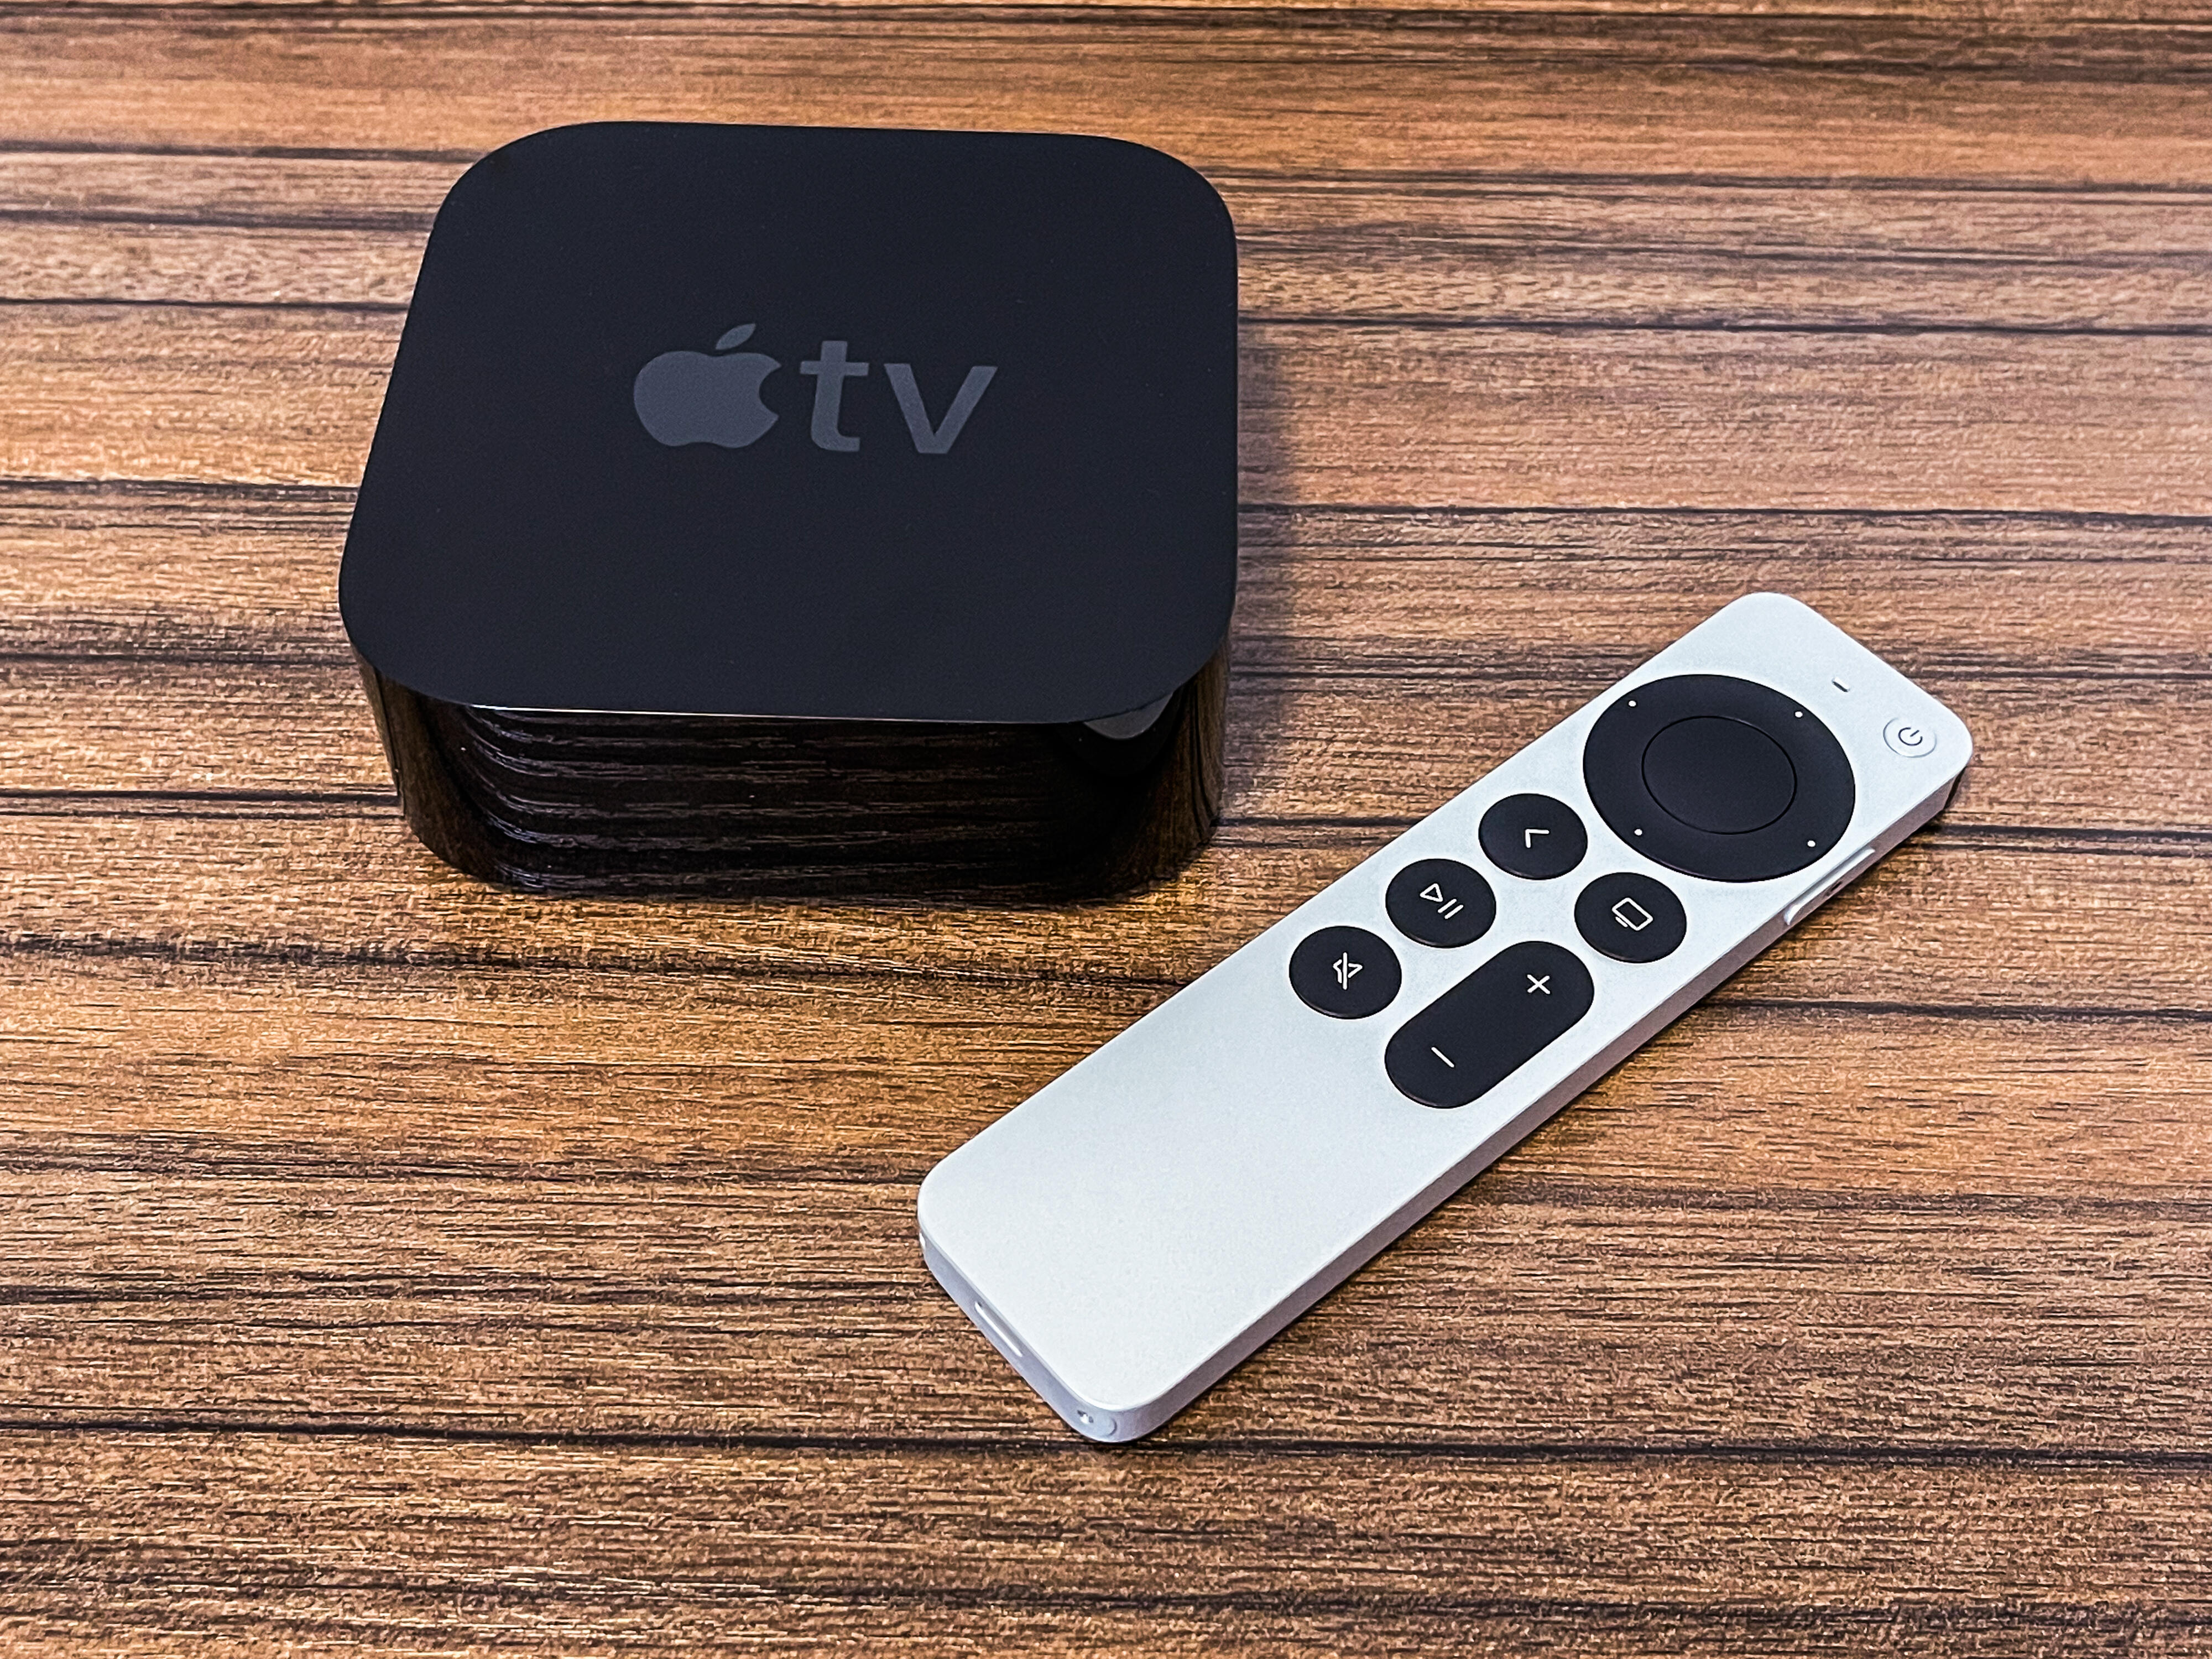 Apple TV 4K (2021) review: New can't make up for high price - CNET